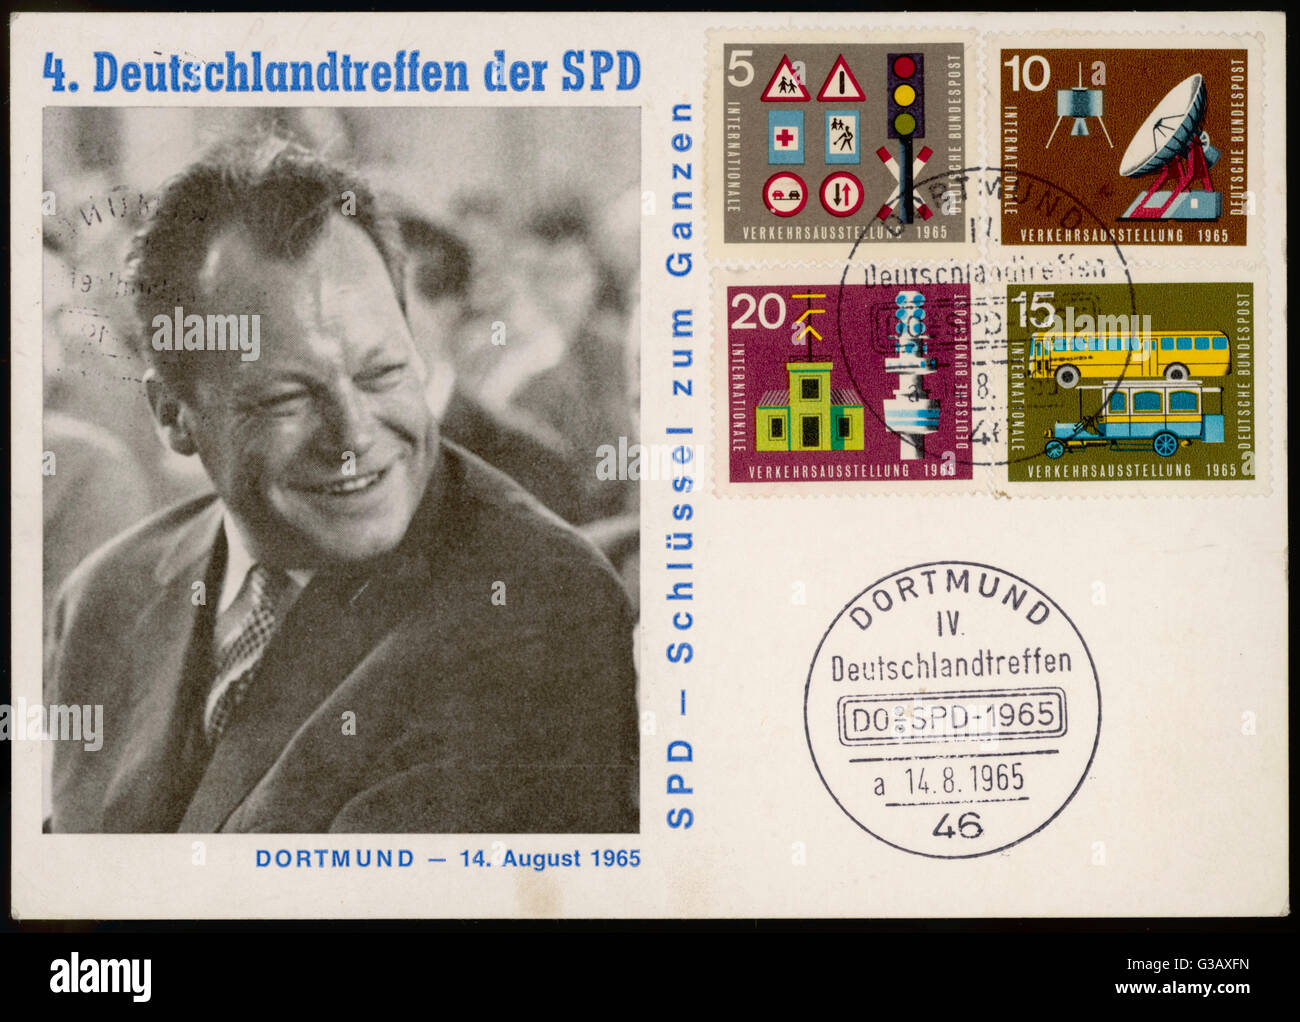 WILLY BRANDT German socialist statesman,  leader of Social Democrats,  mayor of Berlin, federal  chancellor 1969-74, Nobel  Peace Prize 1971     Date: 1913 - 1992 Stock Photo